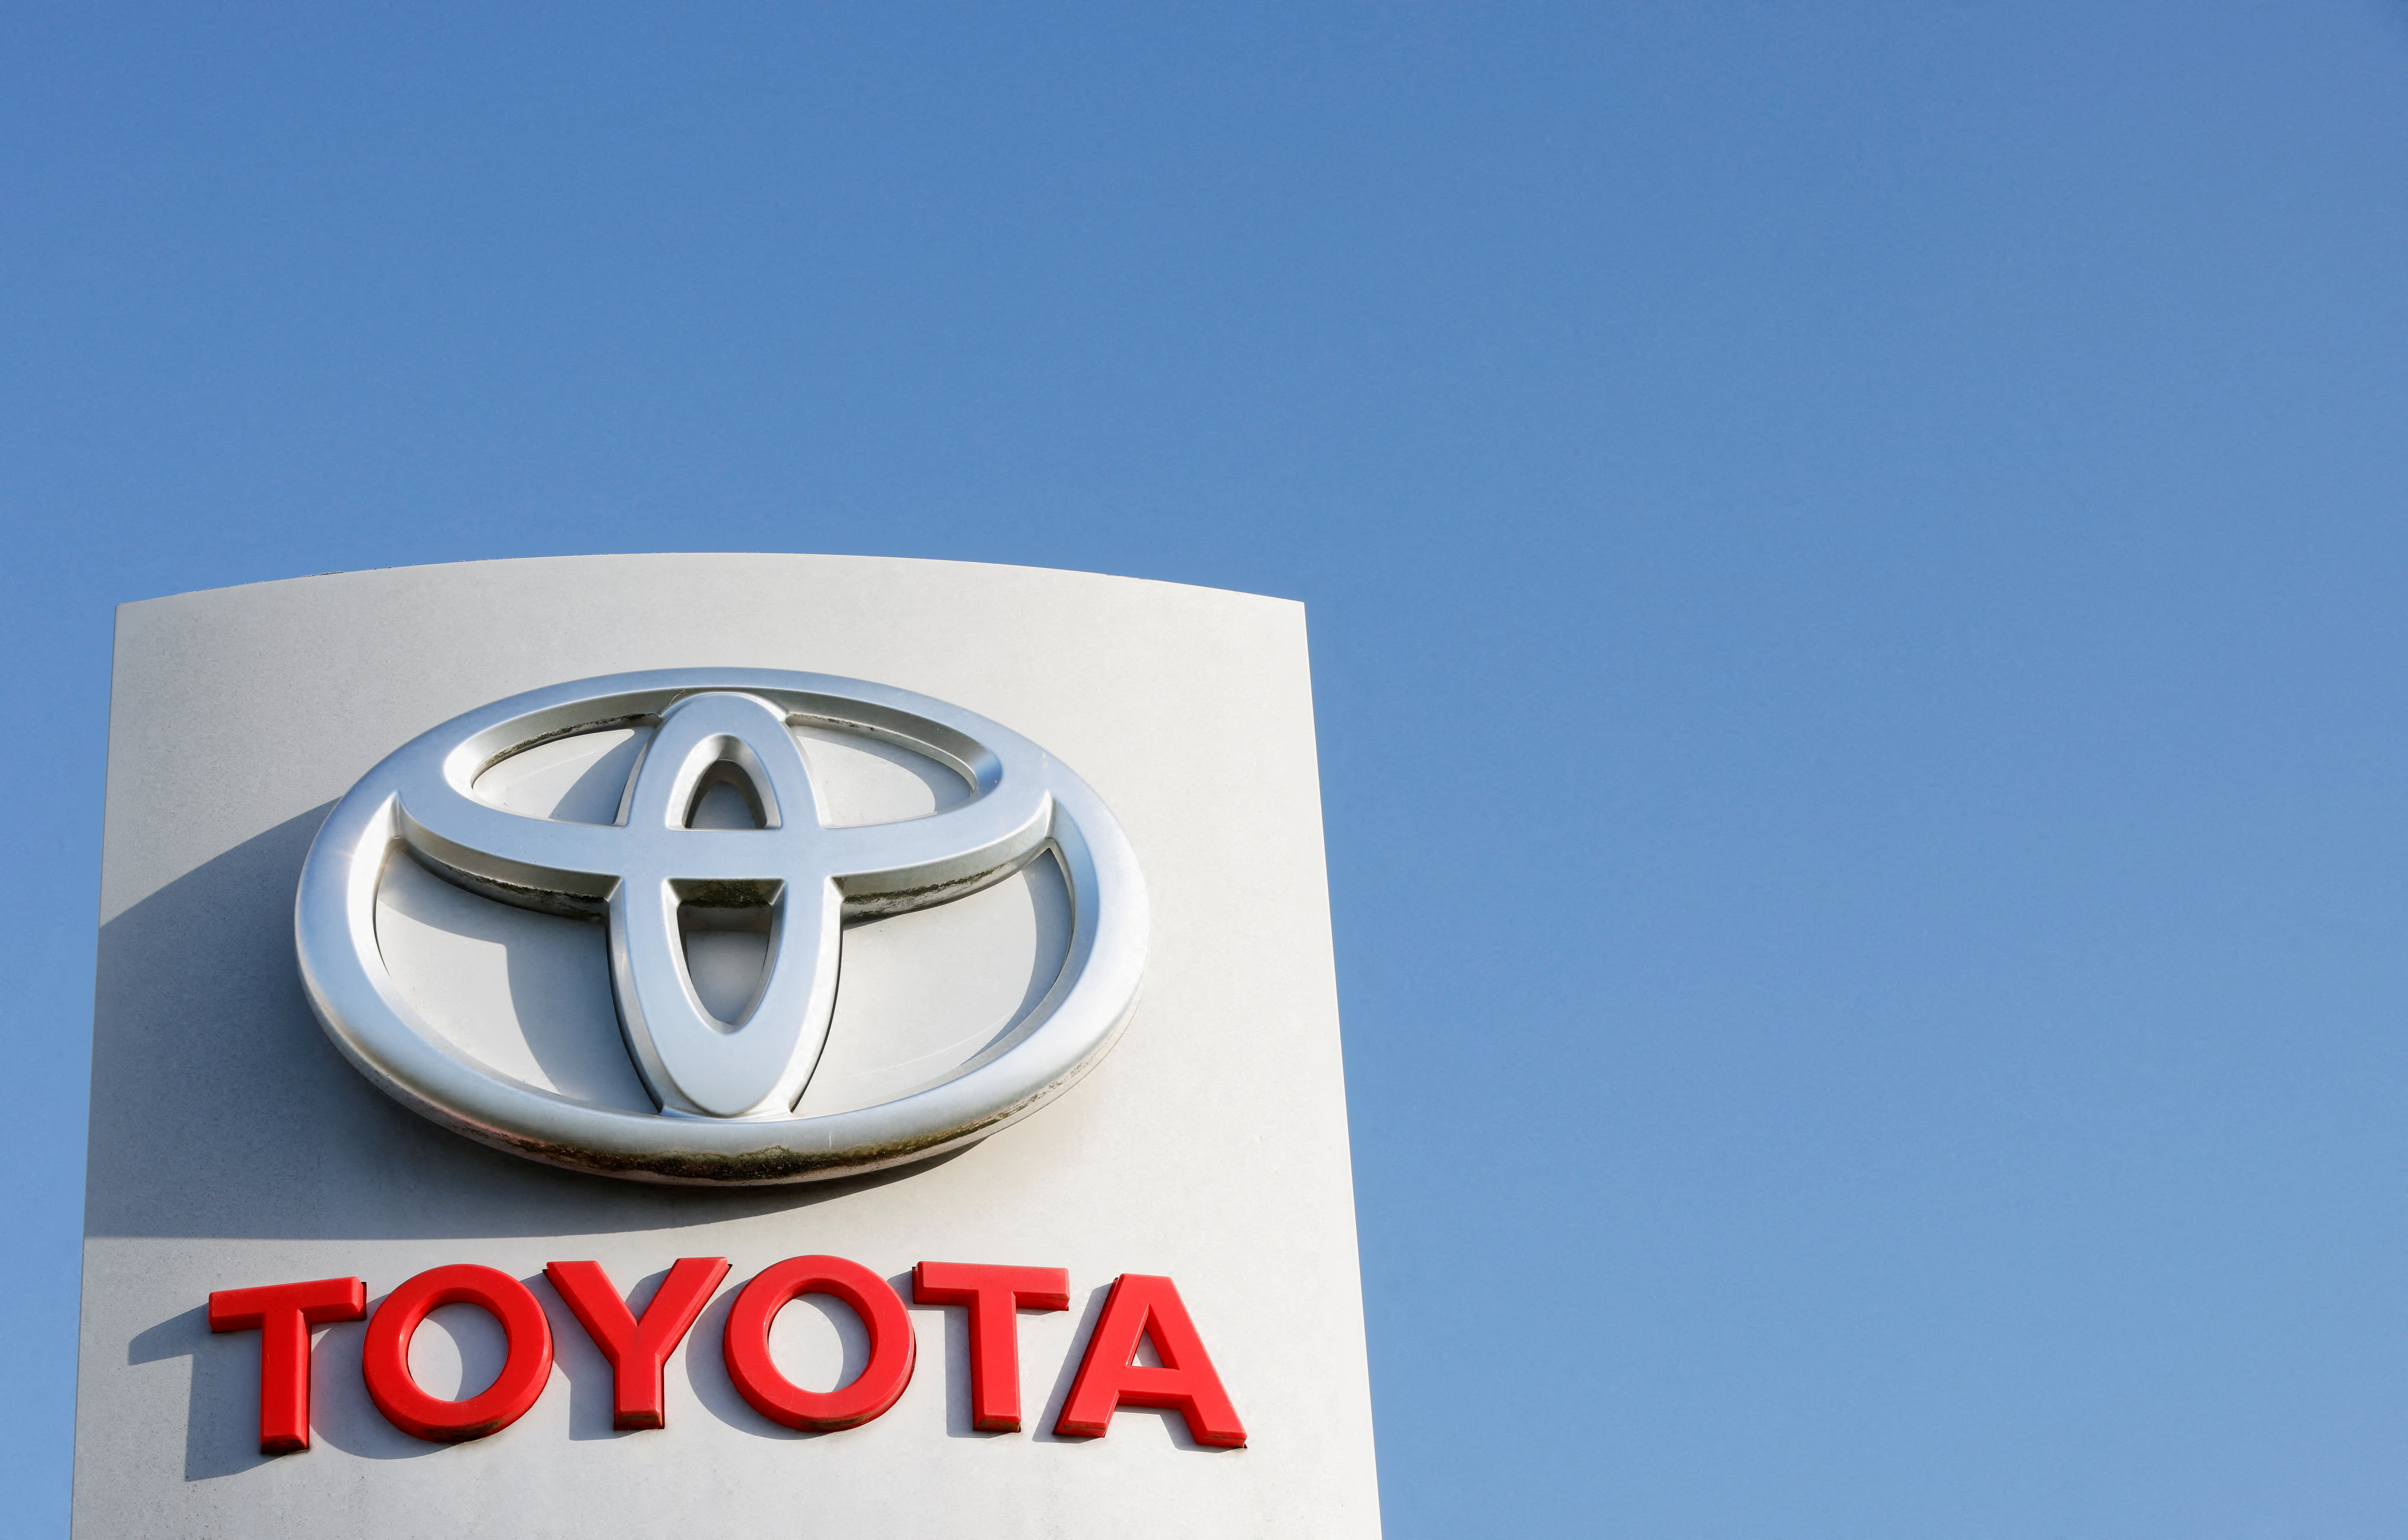 Exclusively: Toyota Group companies plan to sell Denso’s stake for $4.7 billion